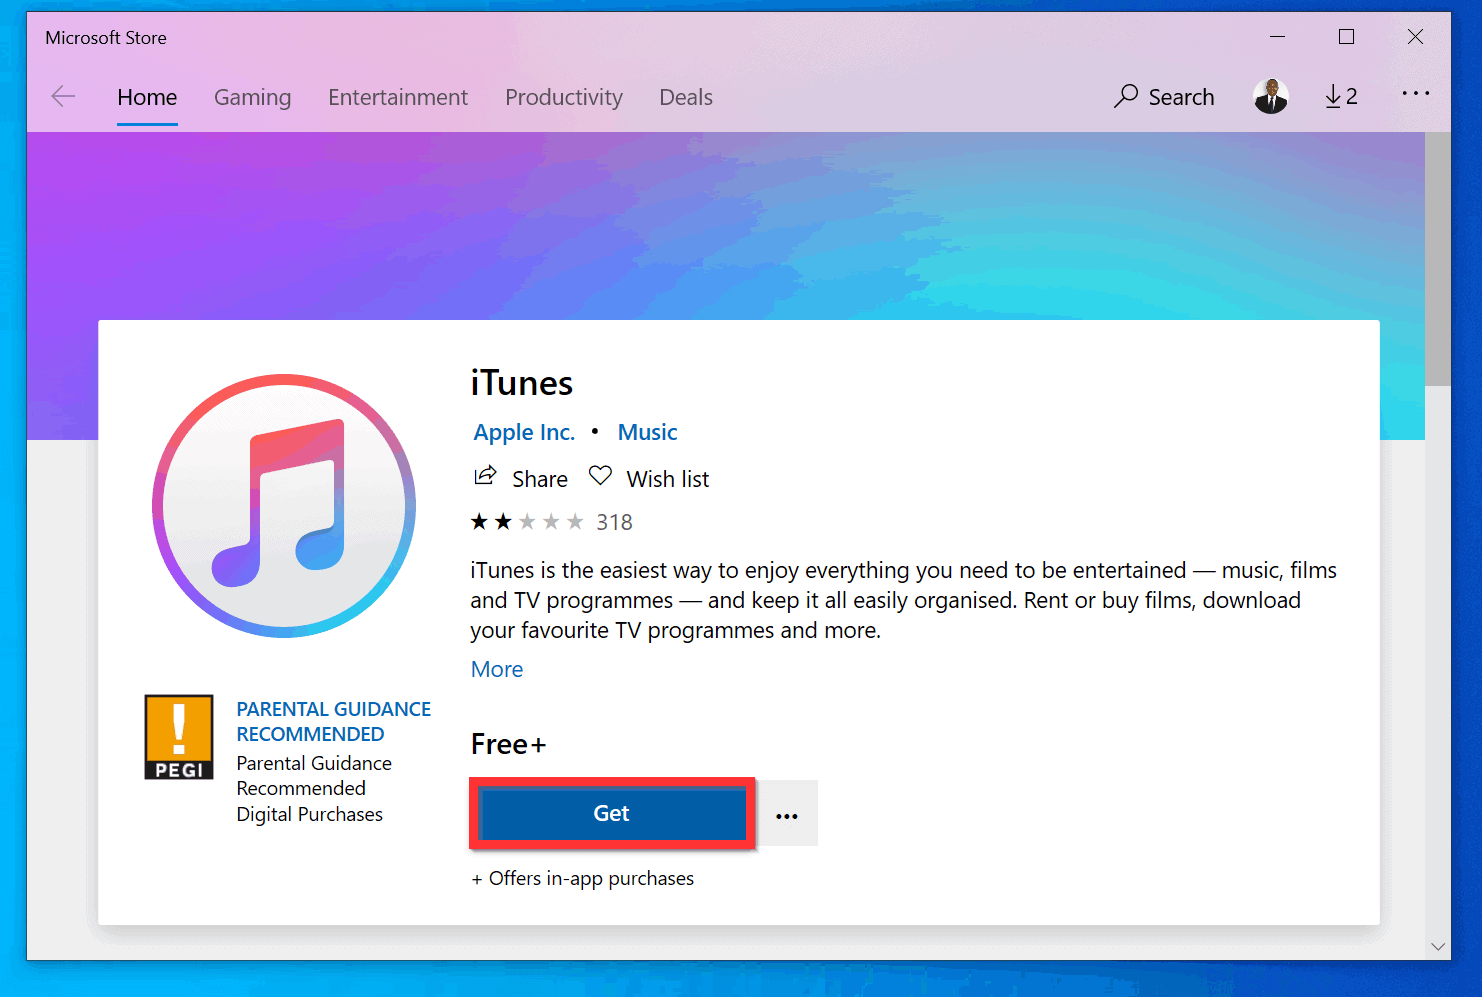 download itunes for windows 10 latest version